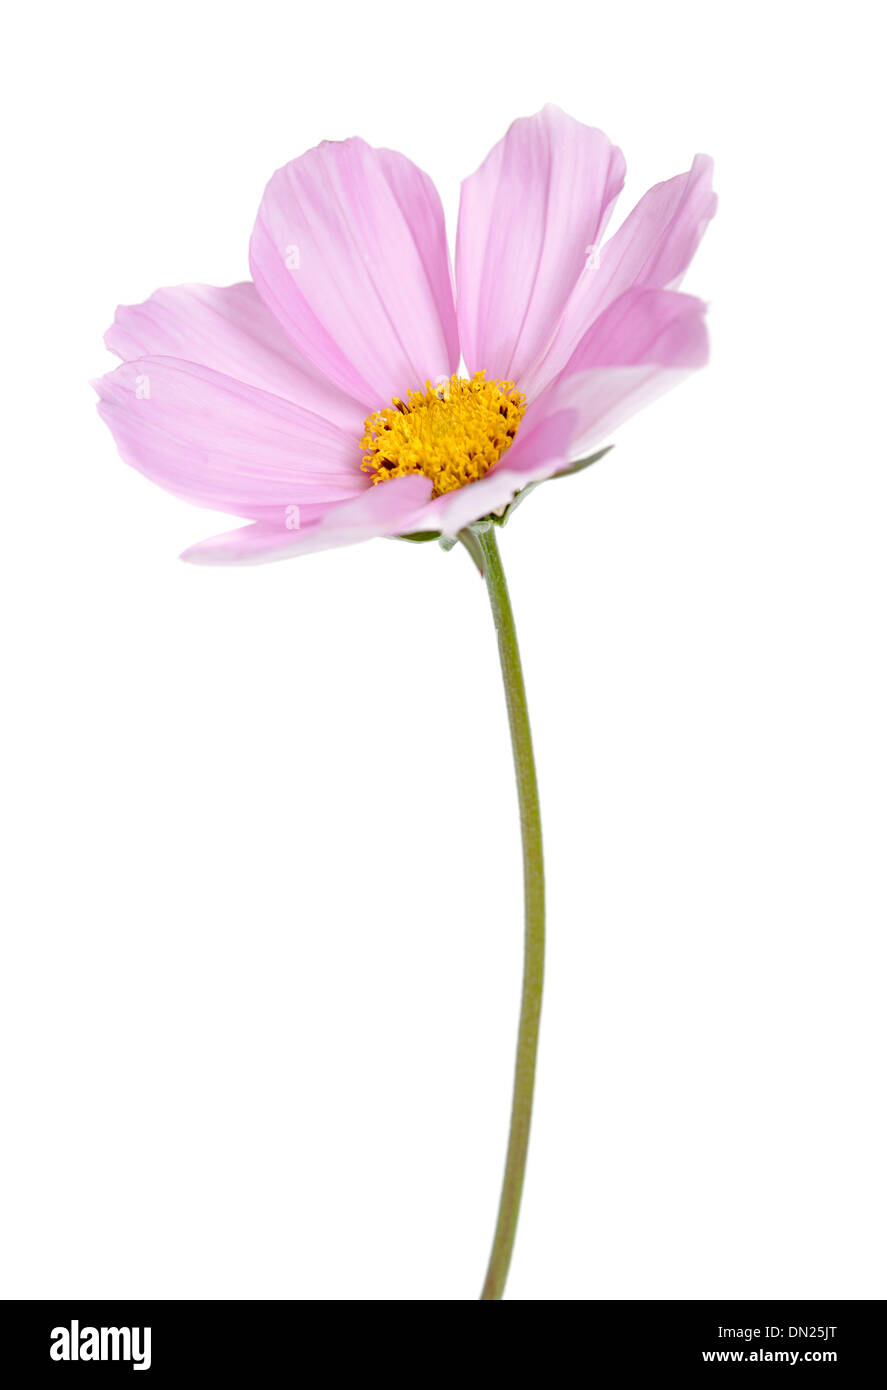 Pink Cosmos flowers isolated on white background with shallow depth of field. Stock Photo